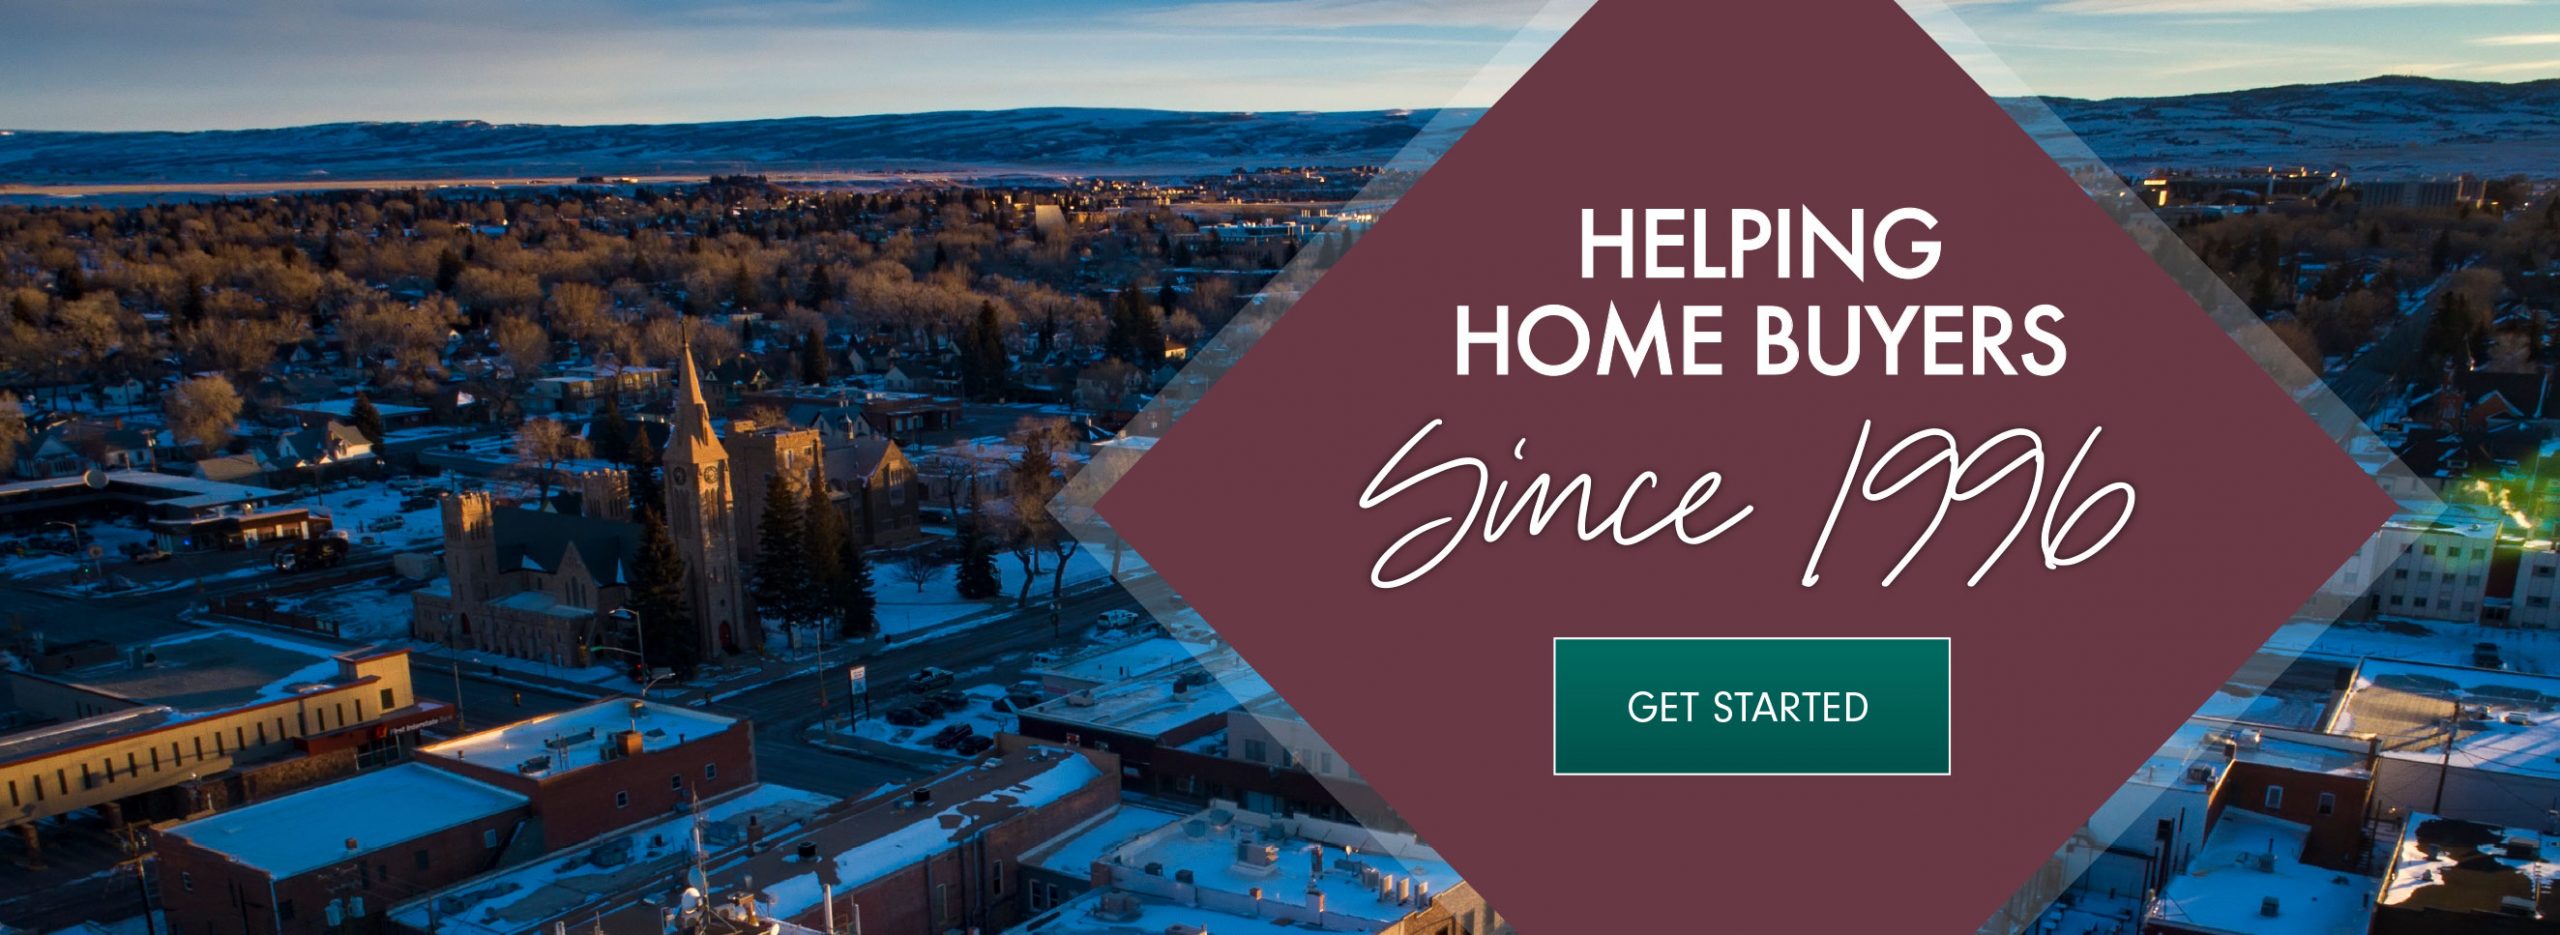 Helping Home Buyers since 1996 with Get Started button over image of Laramie